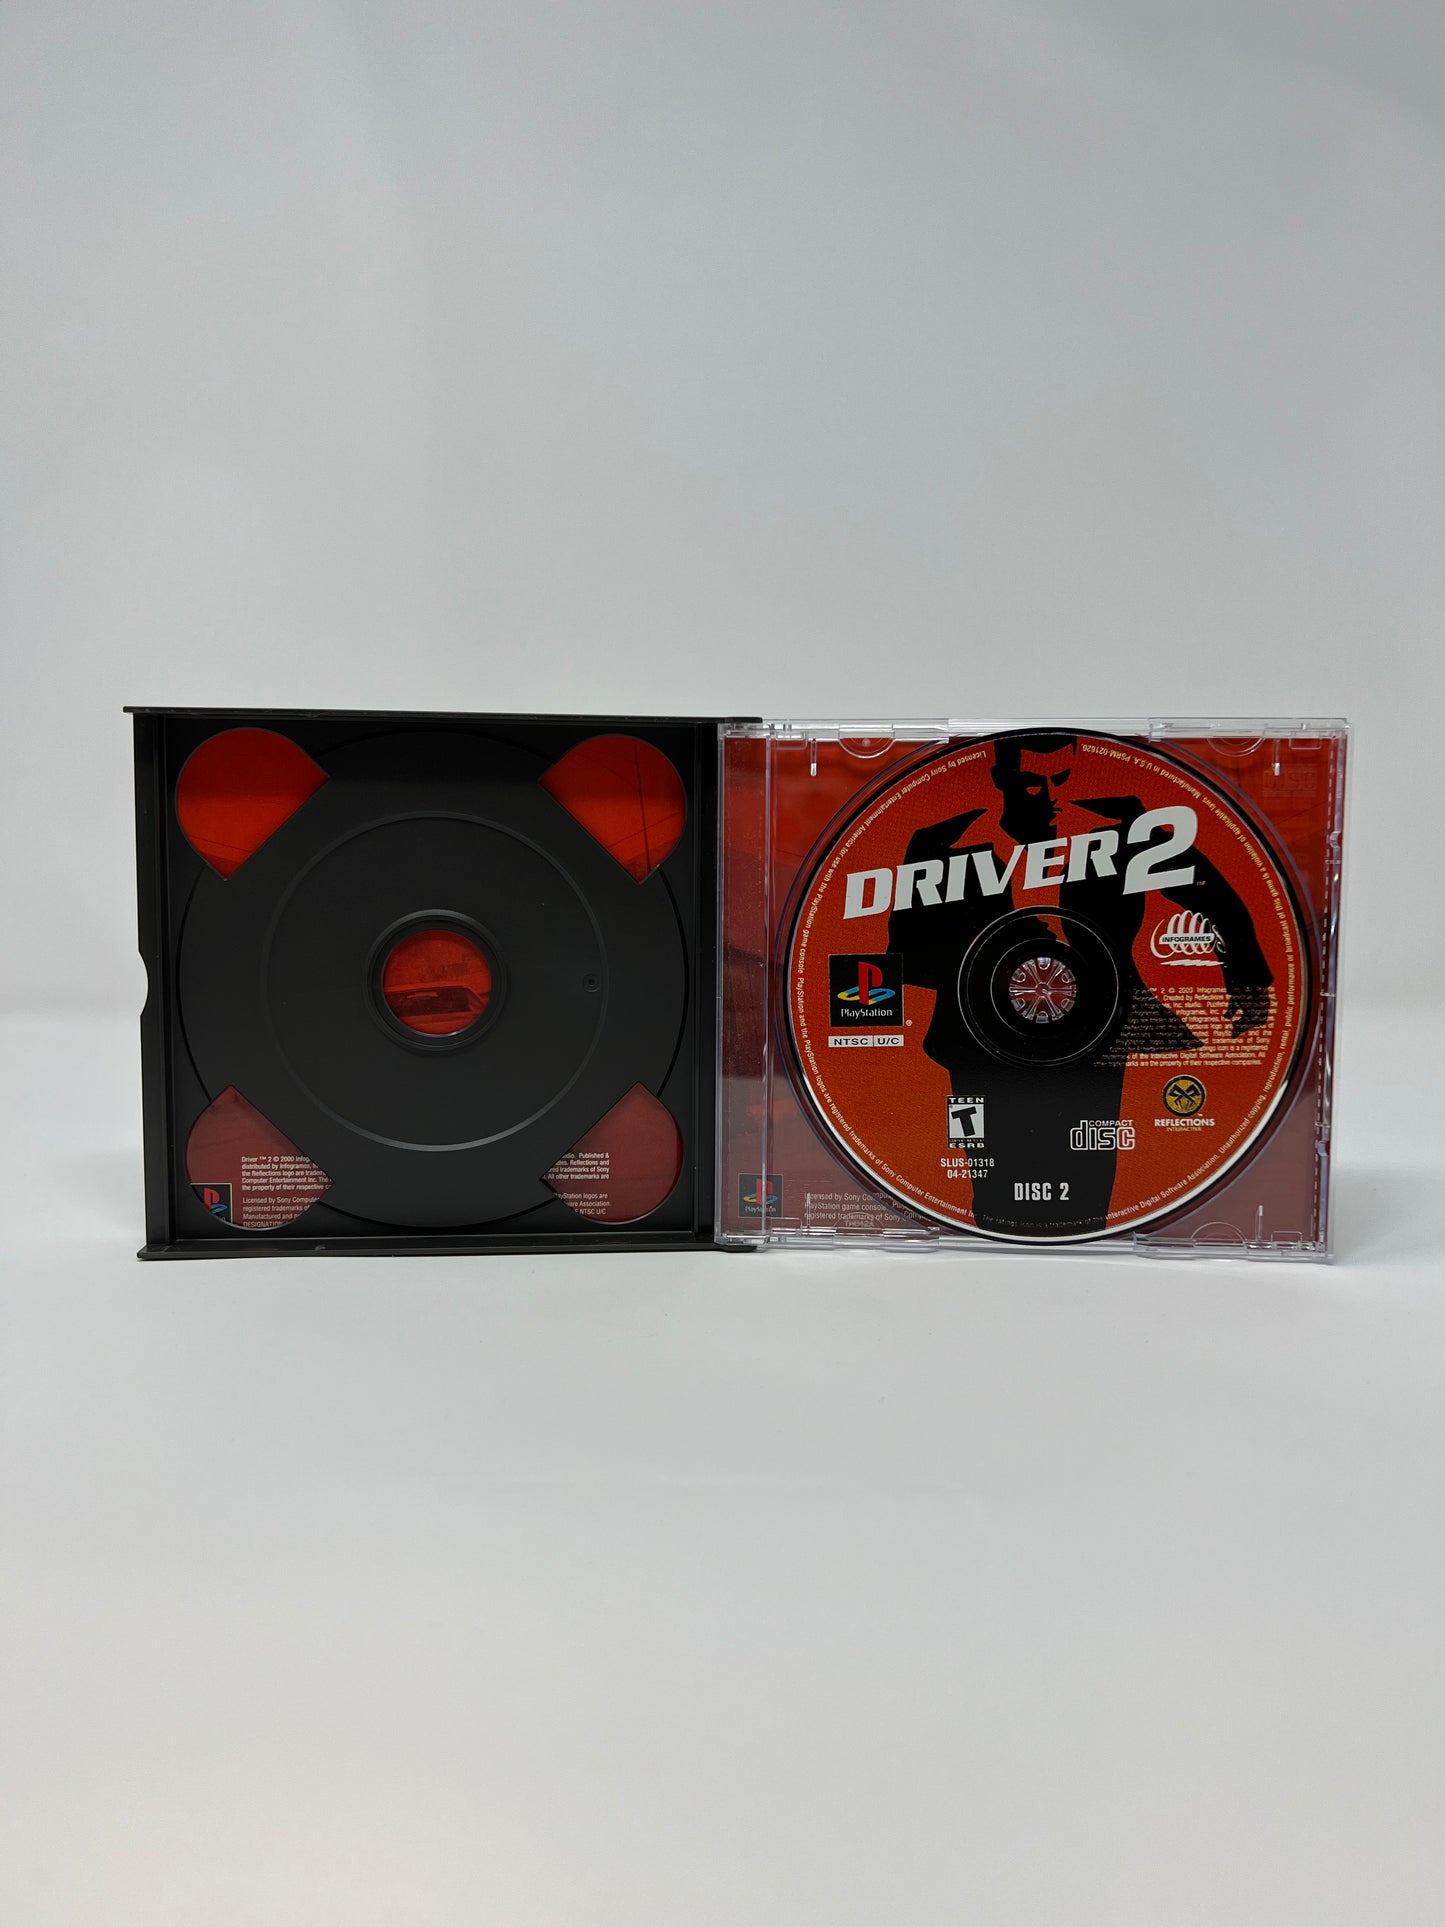 Driver 2 - PS1 Game - Used